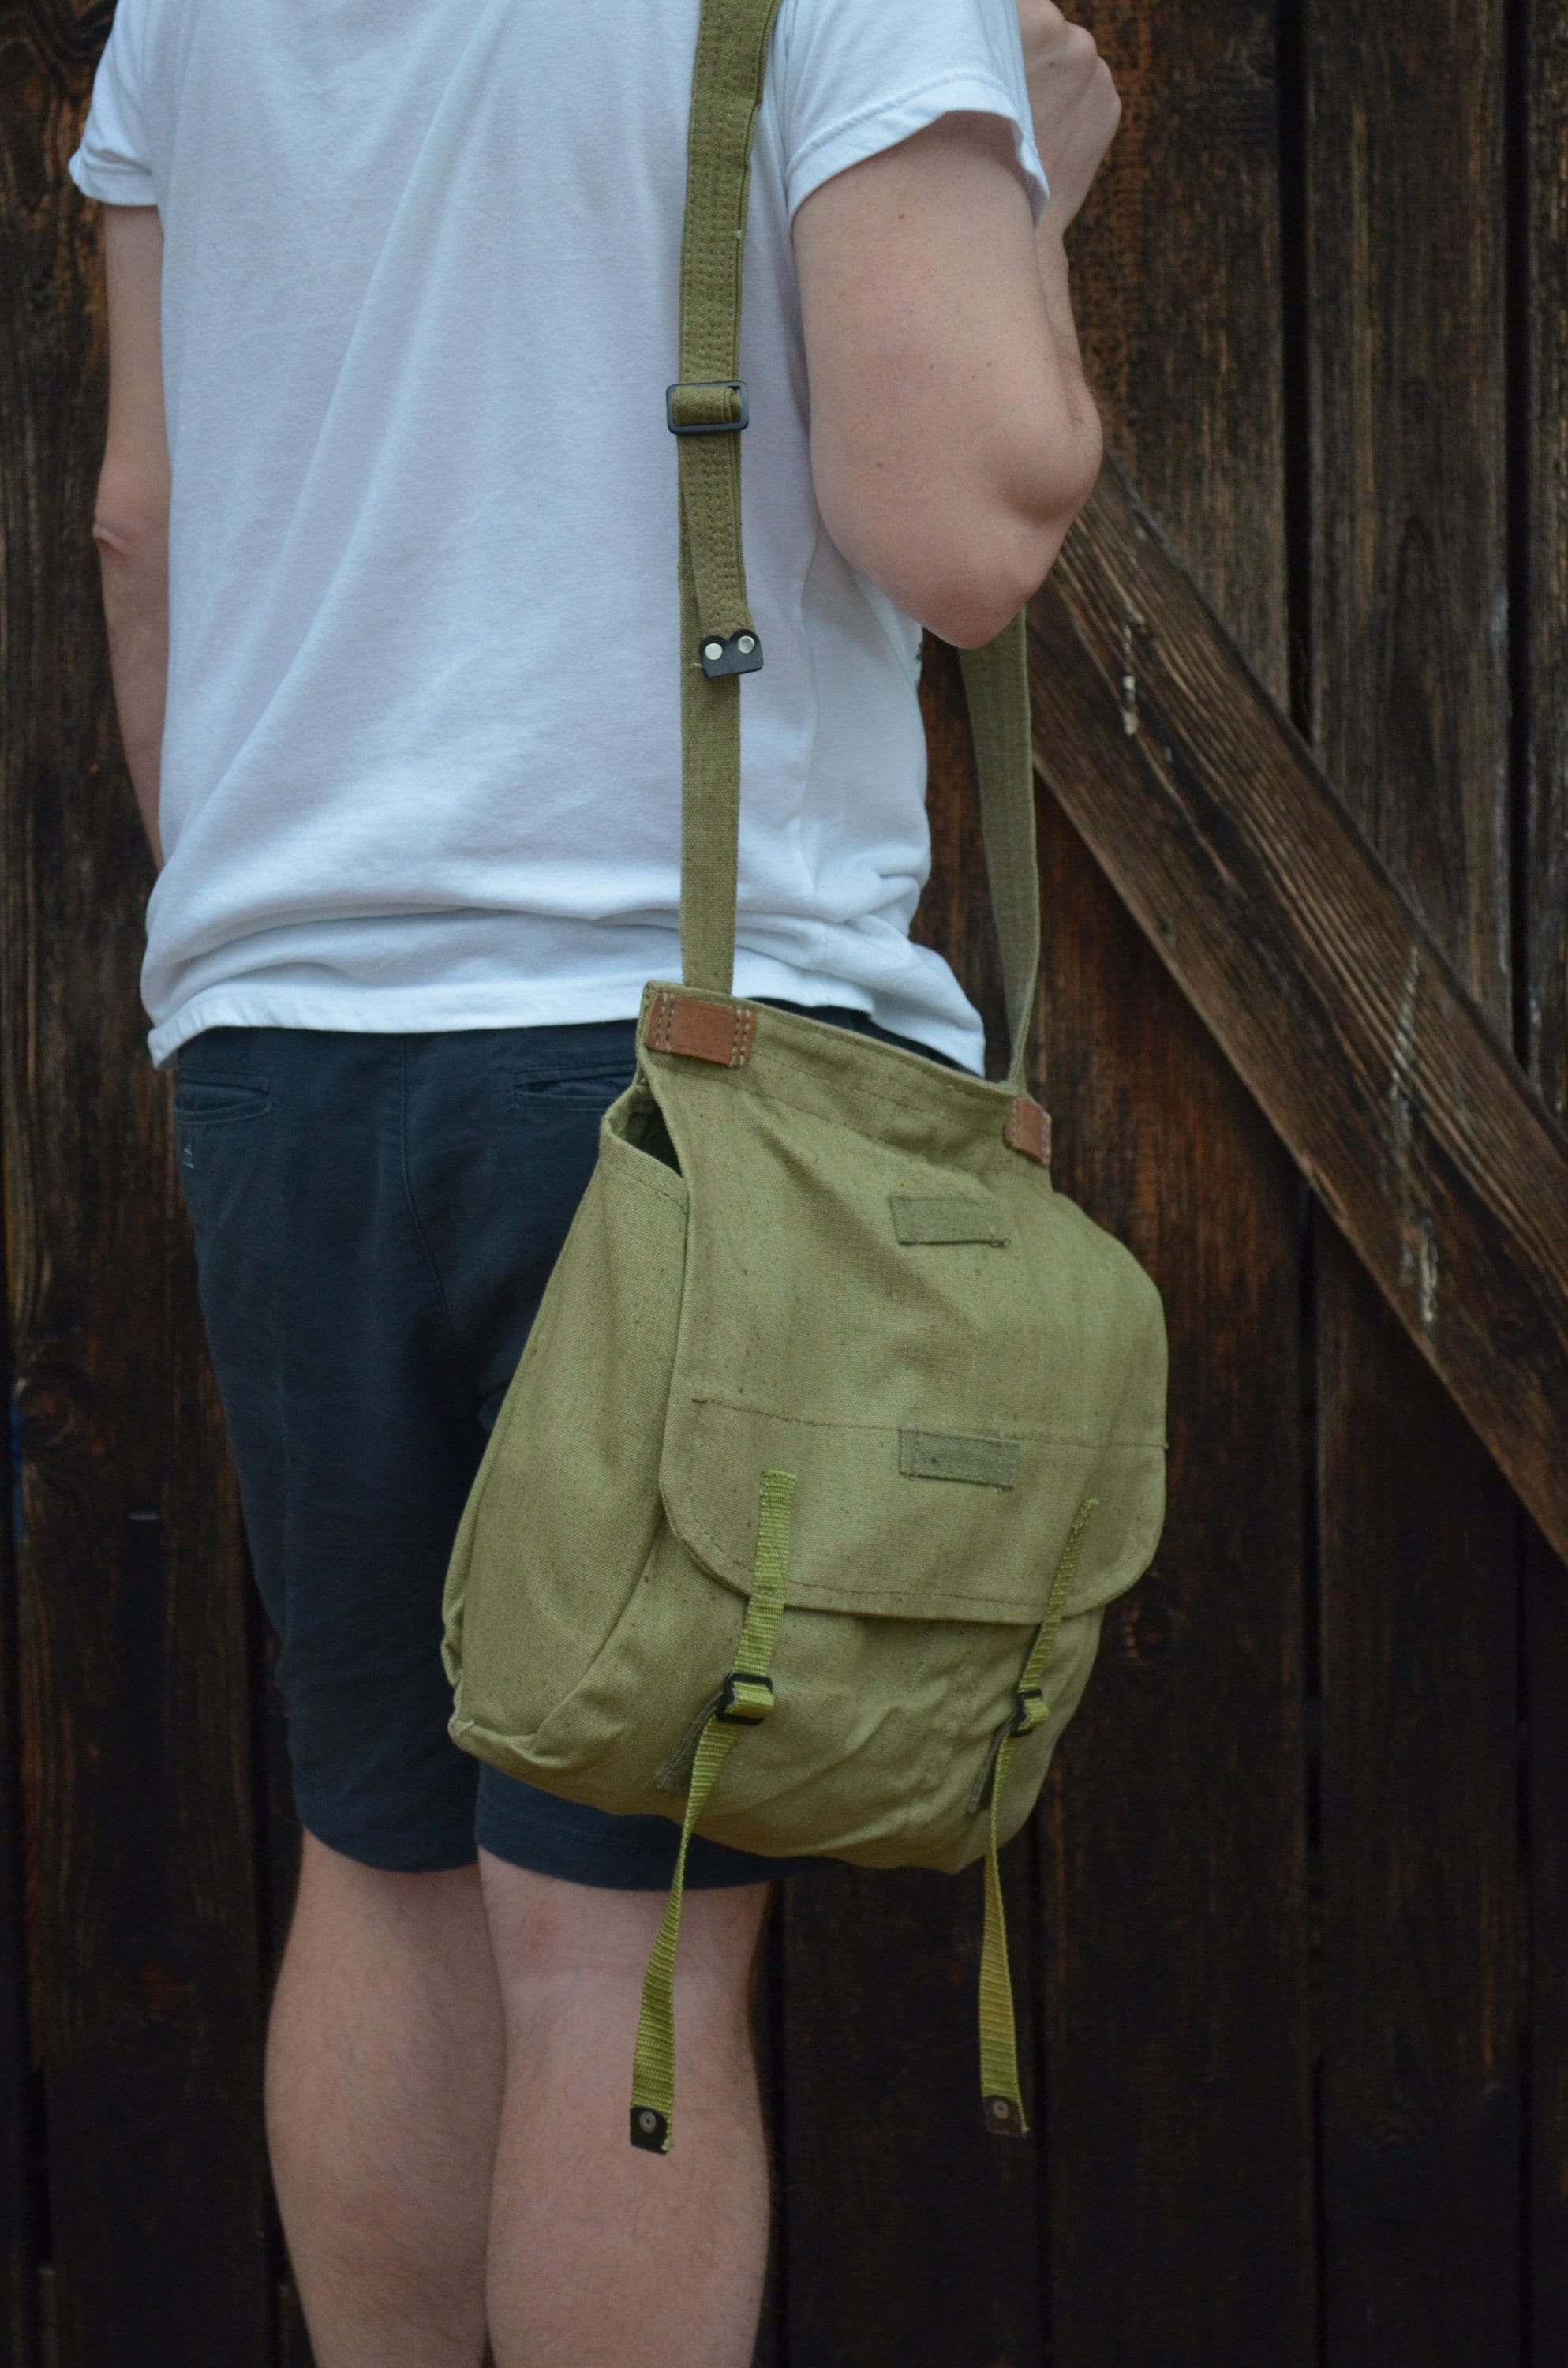 Army Green Canvas Messenger Bag, In stock!